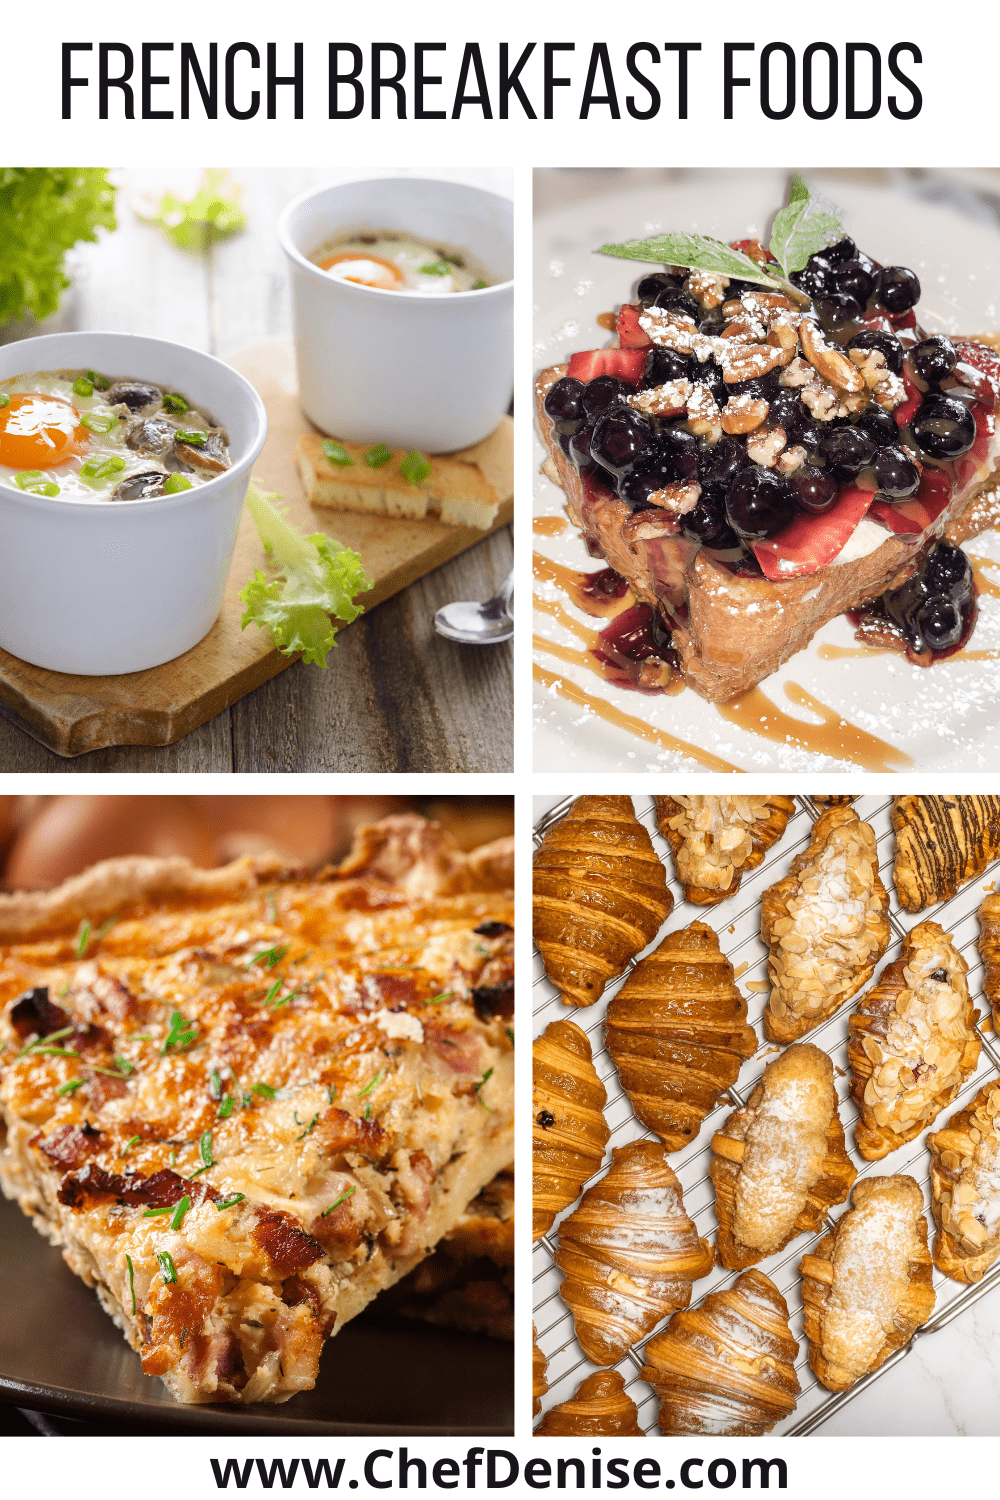 10 traditional French breakfast recipes